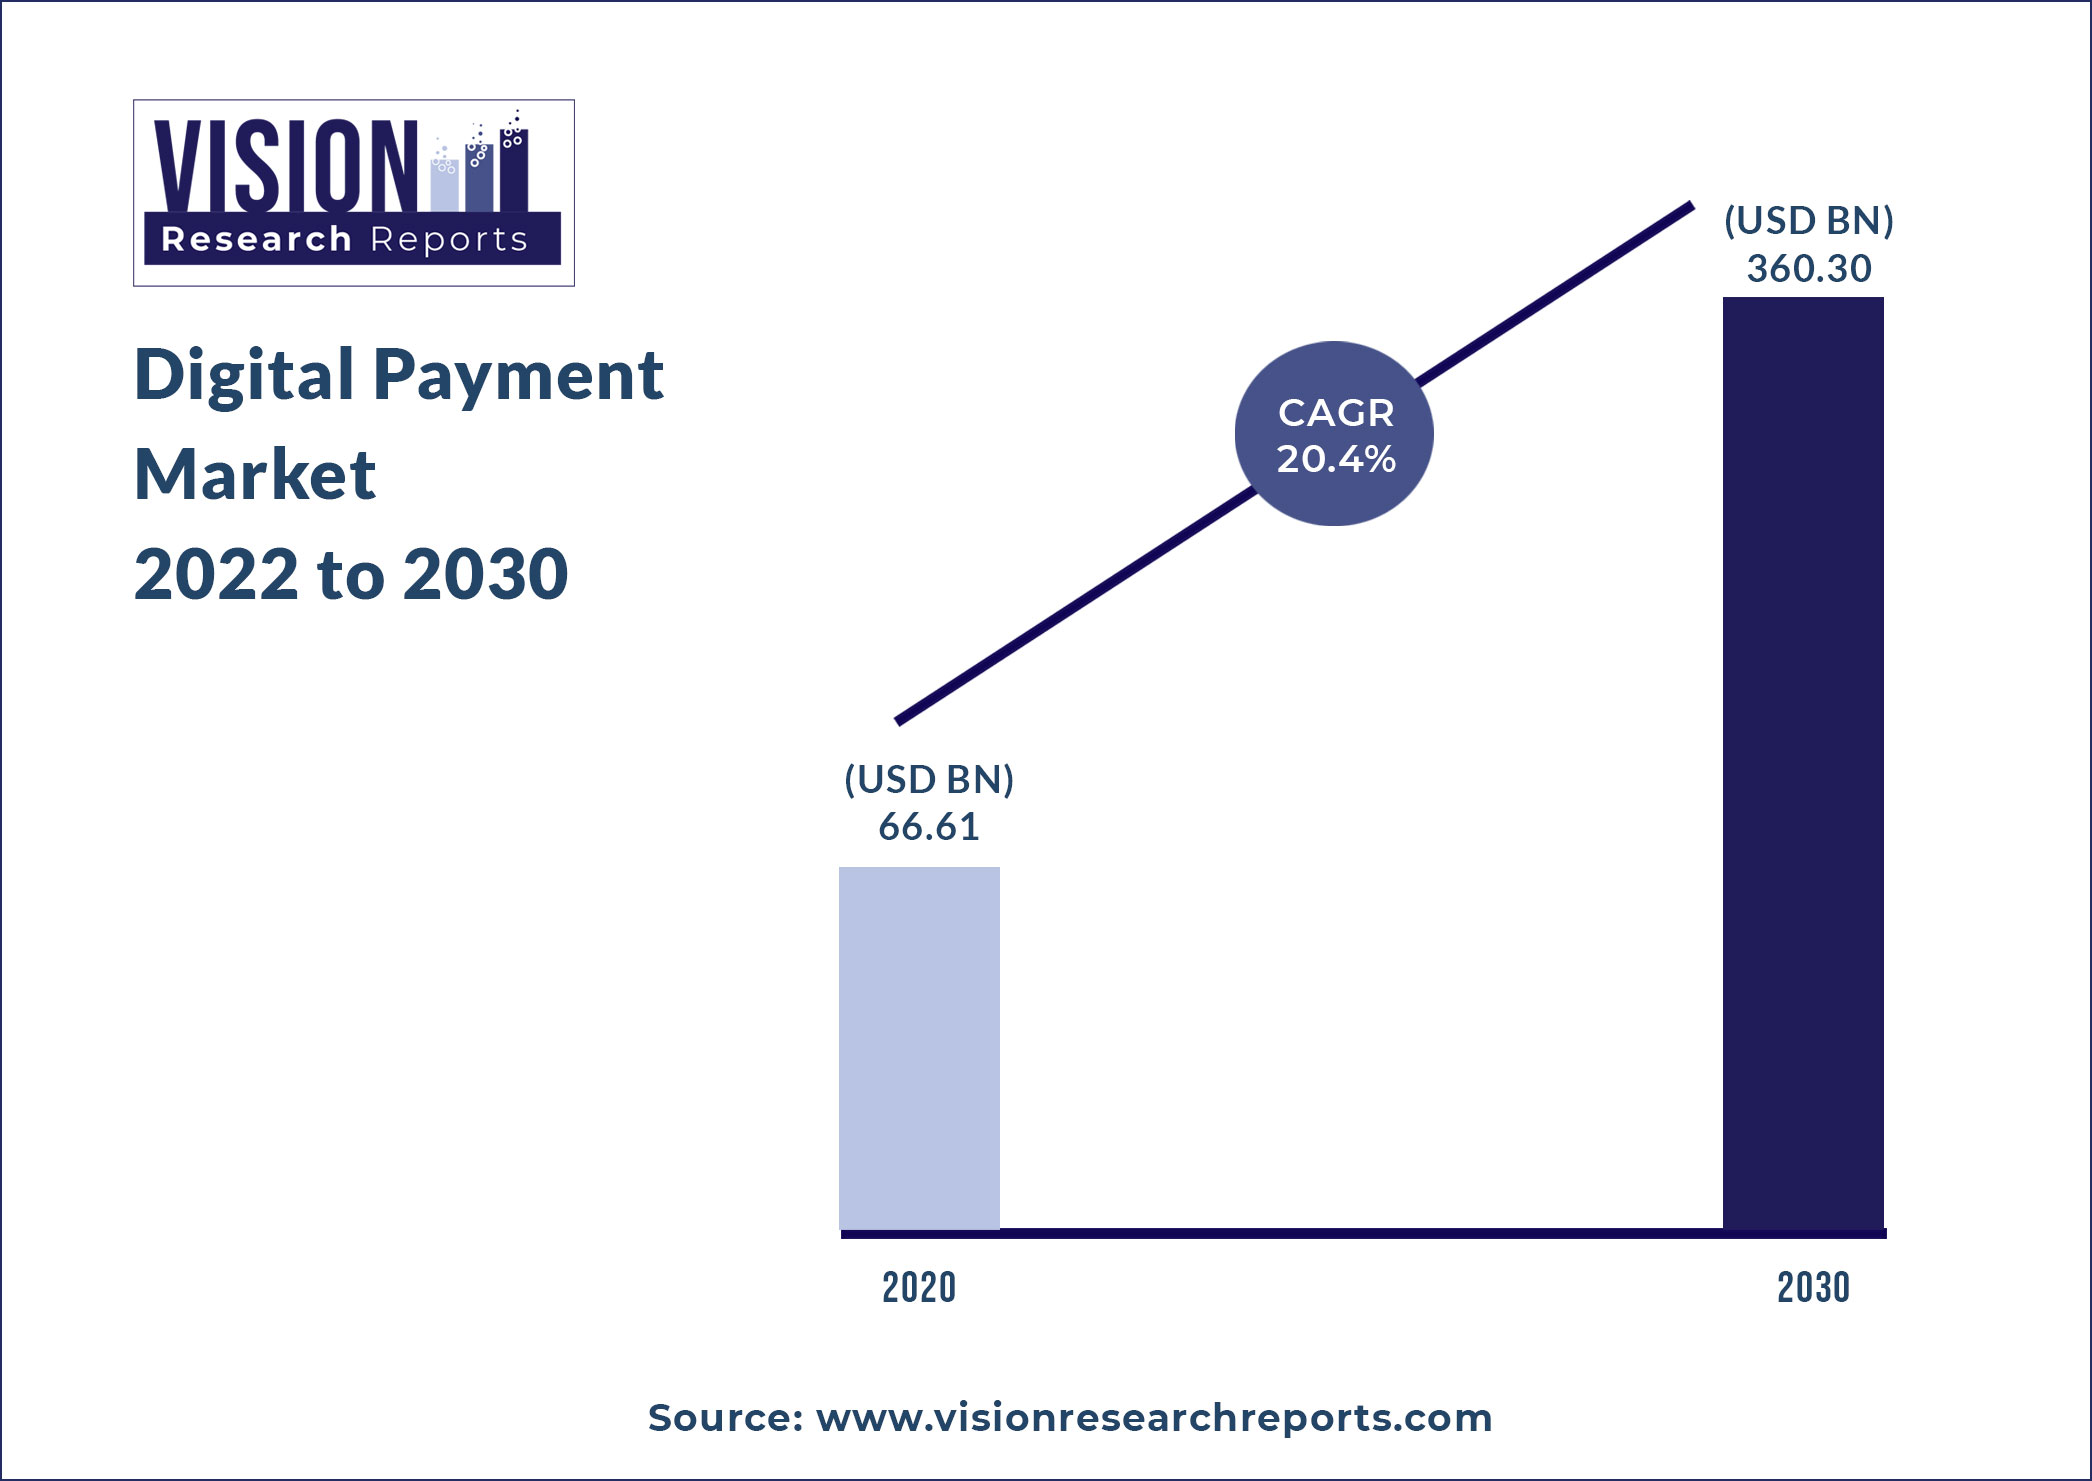 Digital Payment Market Size 2022 to 2030